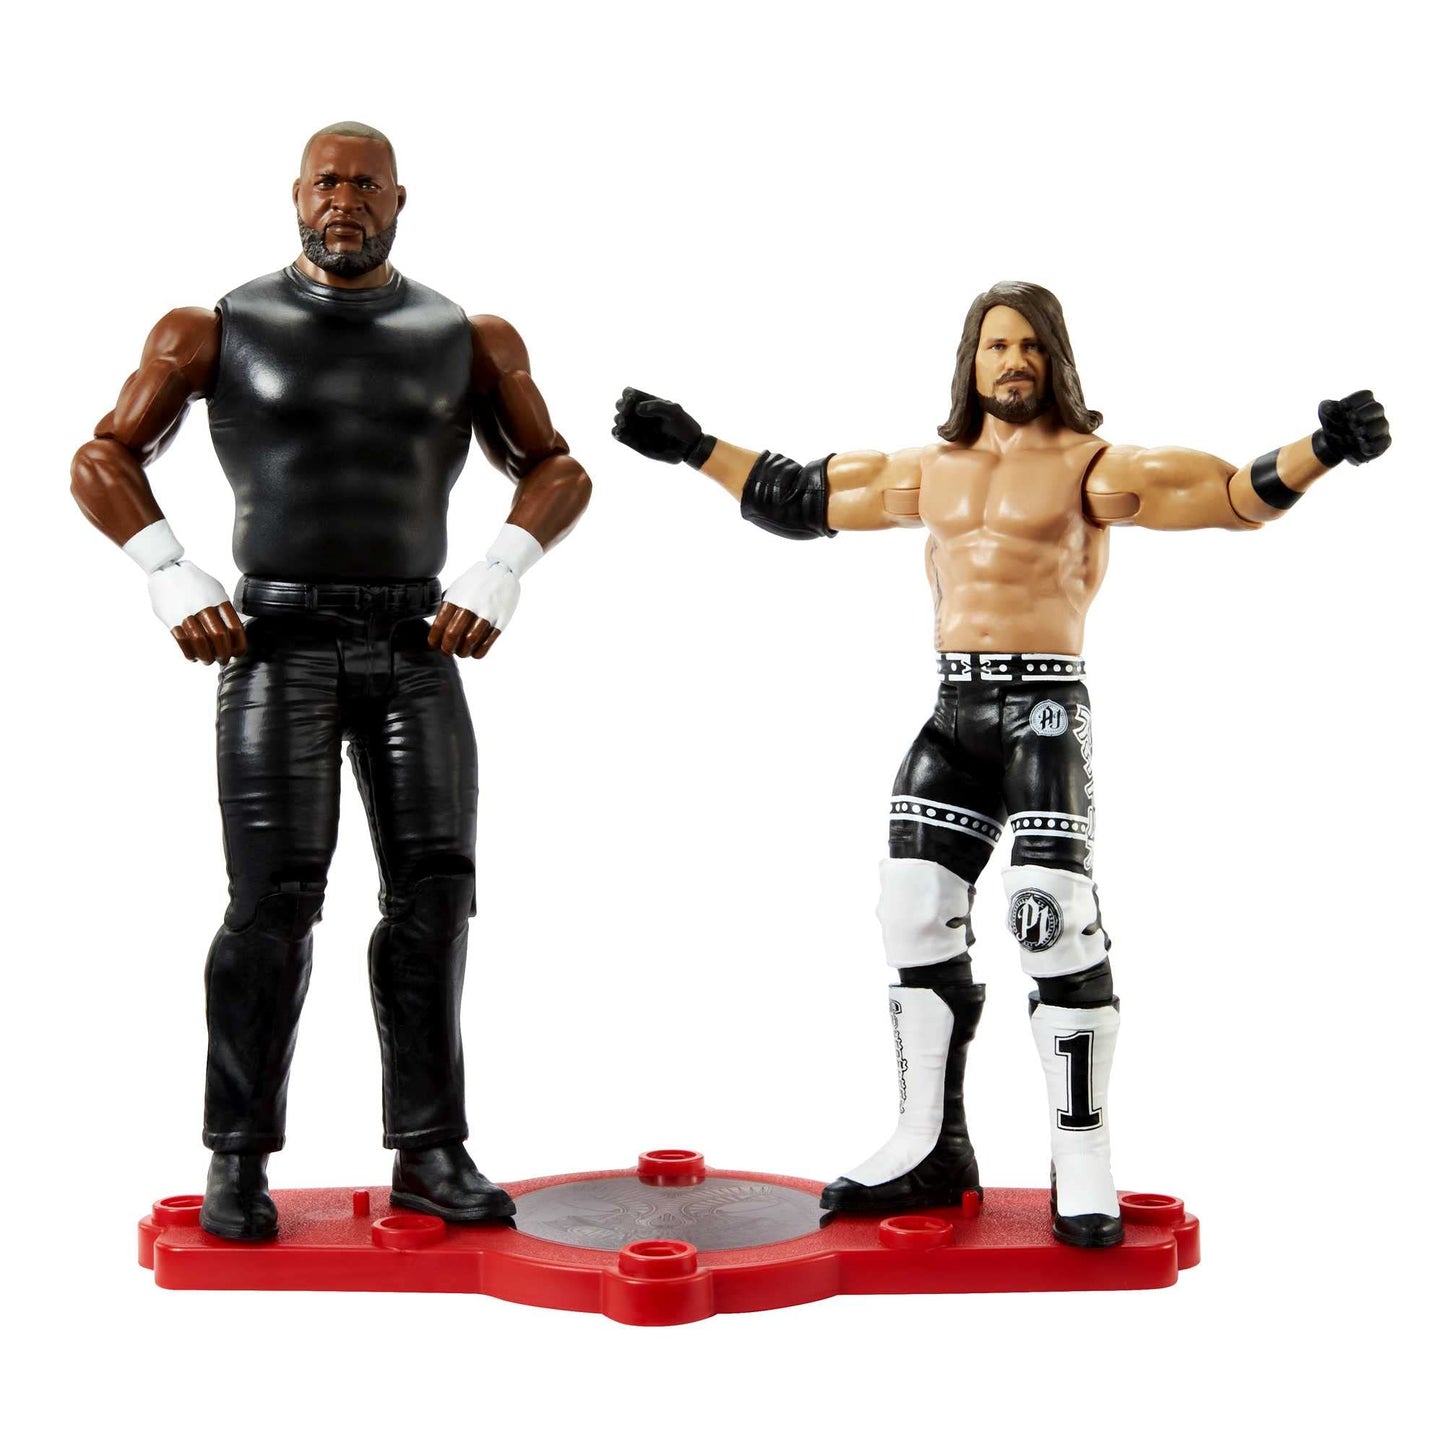 Mattel Jeff Hardy vs AJ Styles Championship Showdown 2-Pack 6-inch Action Figures Friday Night Smackdown Battle Pack for Ages 6 Years Old & Up